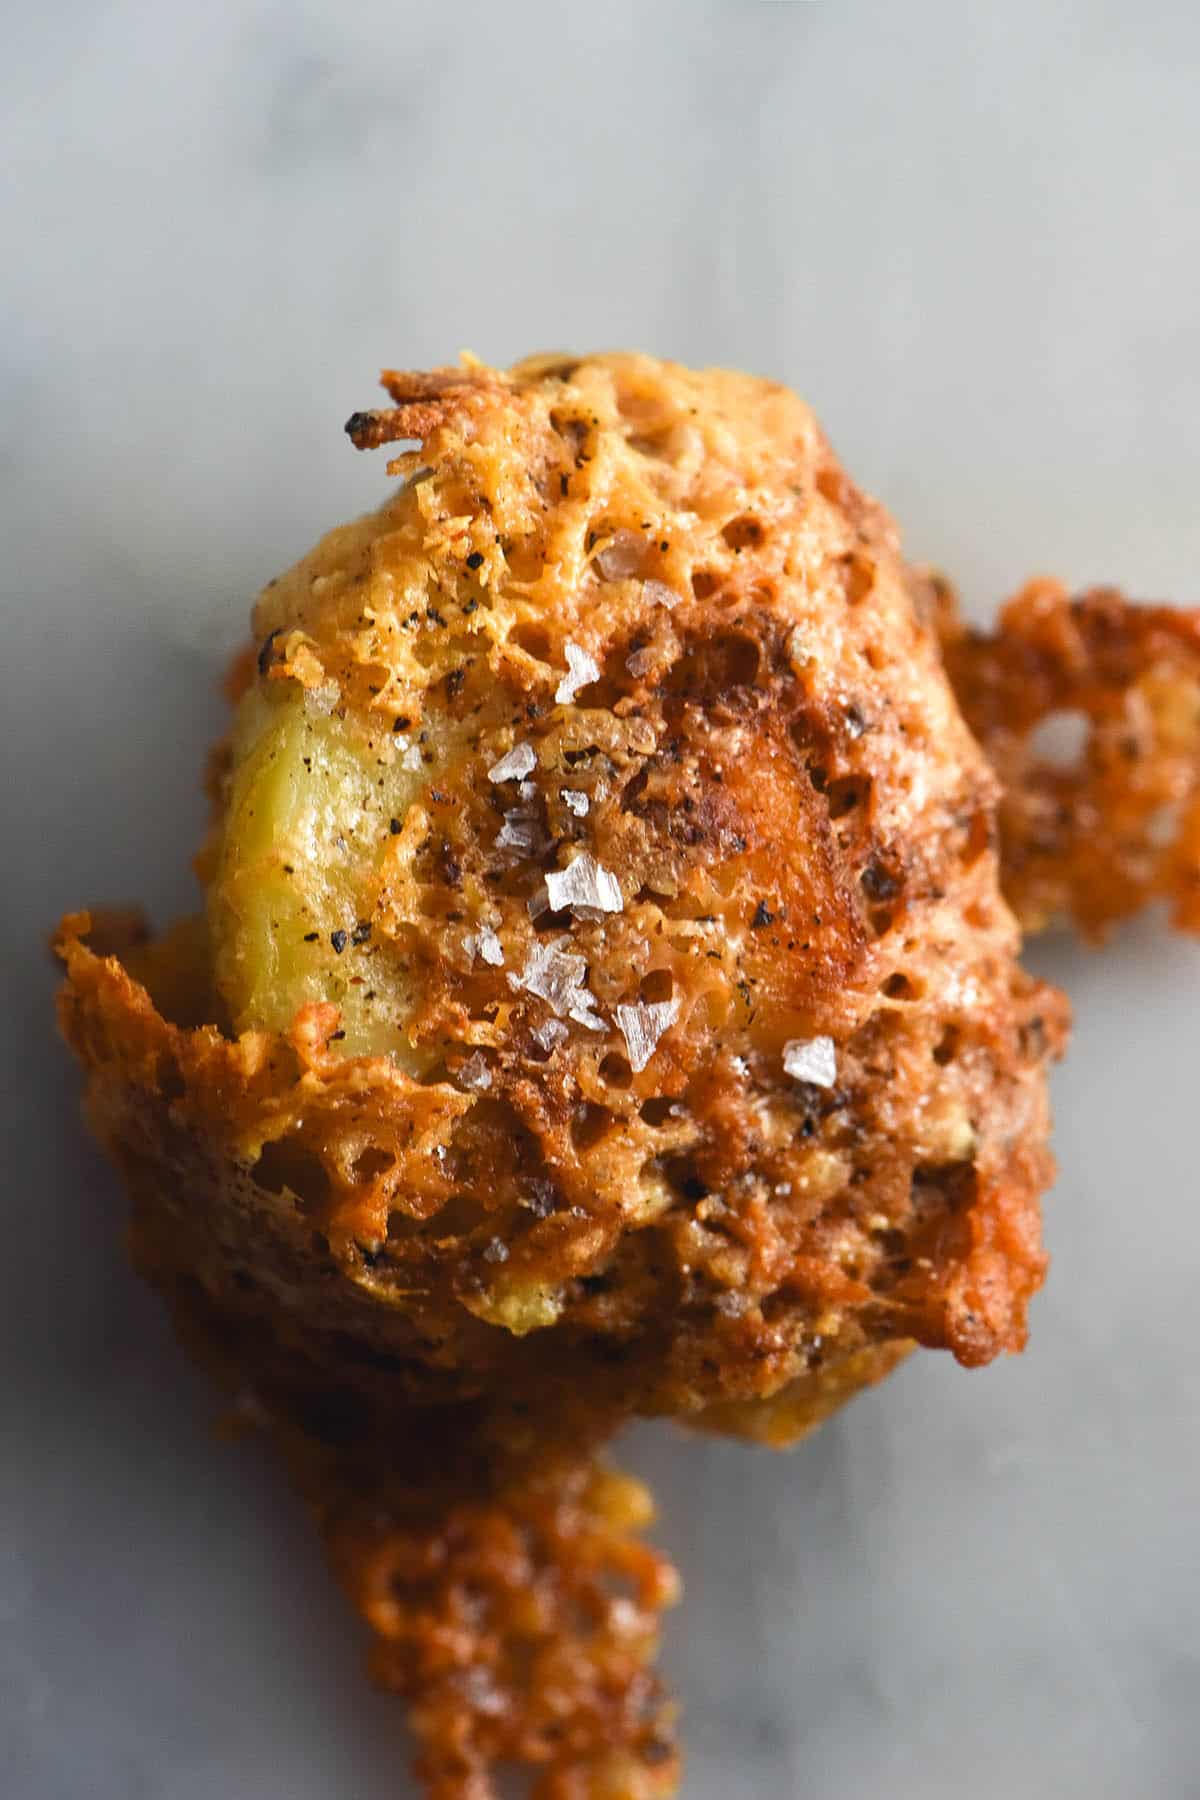 A close up aerial image of a crispy roasted cacio pepe potato. The potato is covered in a crispy parmesan shell flecked with pepper and topped with sea salt flakes. It sits atop a white marble table.